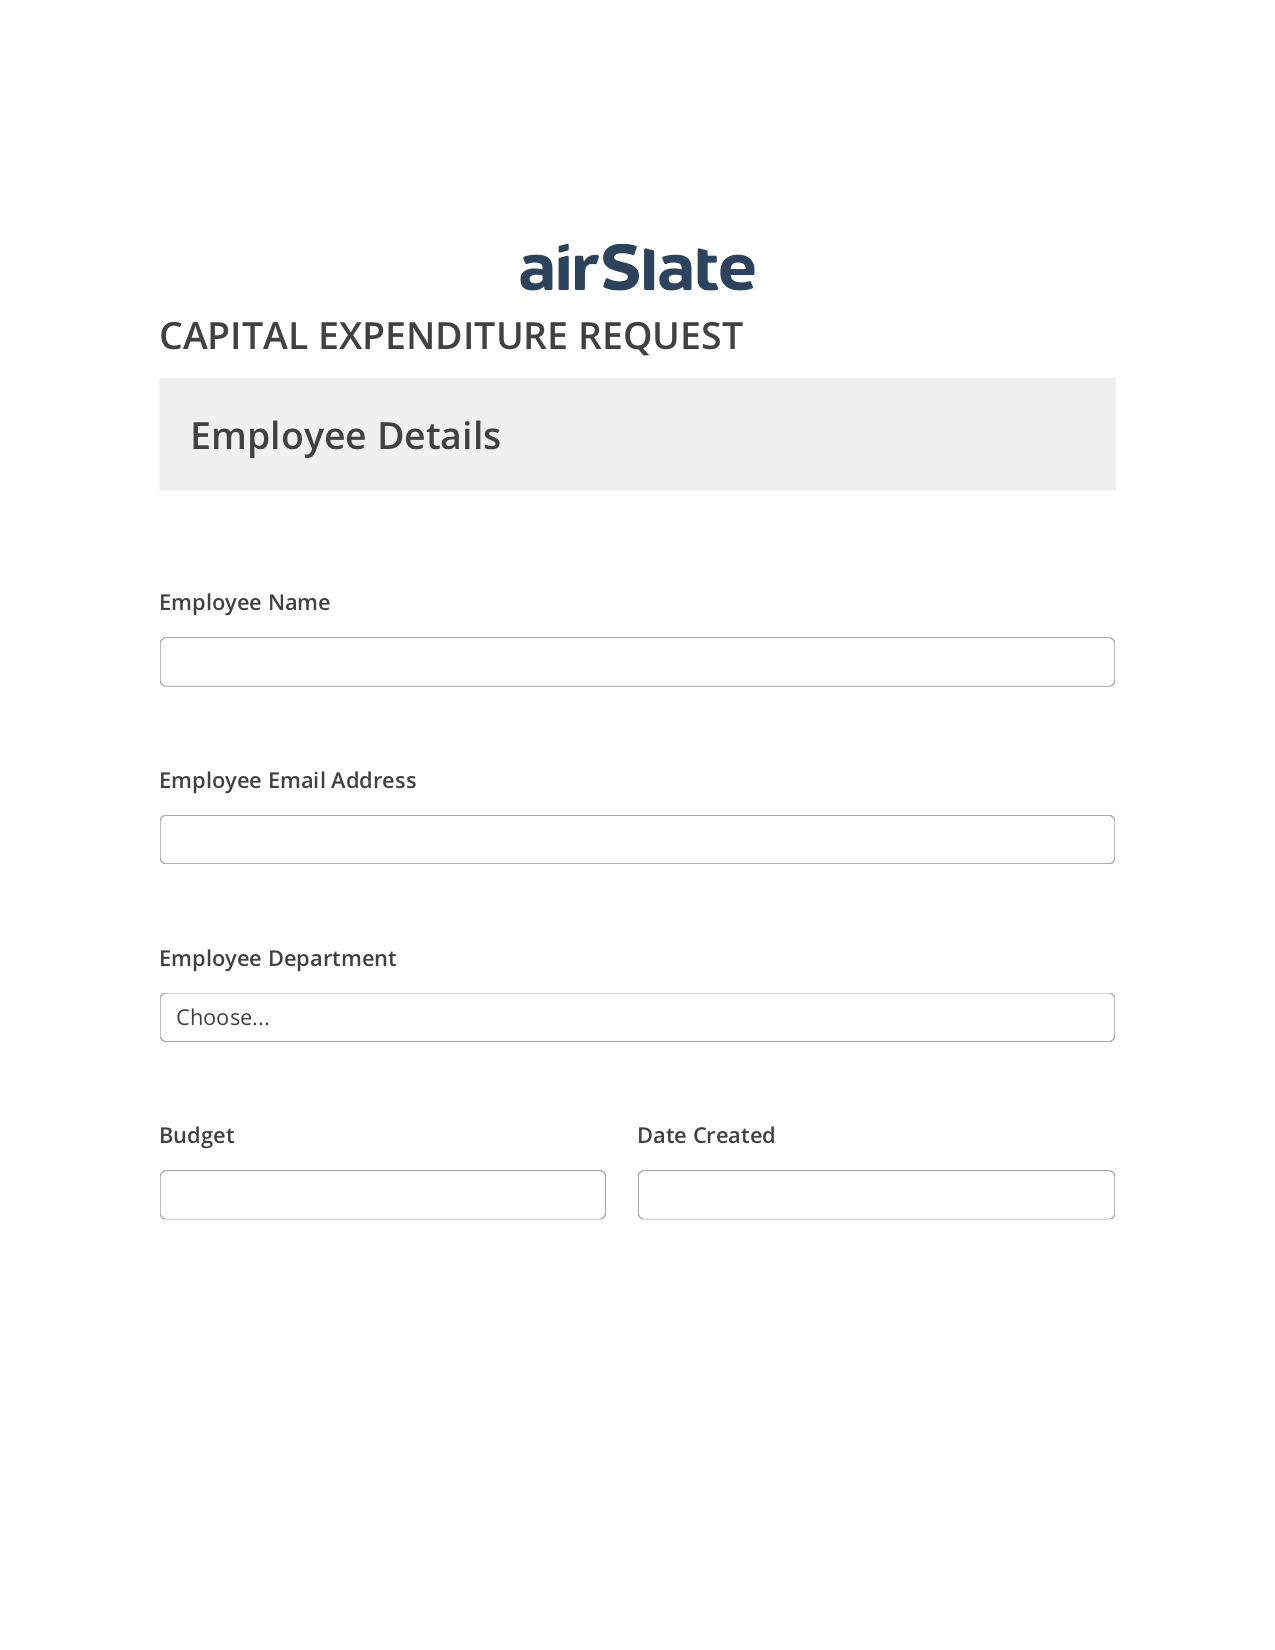 Capital Expenditure Request Approval Workflow Pre-fill Slate from MS Dynamics 365 record, Update Audit Trail Bot, Archive to Box Bot